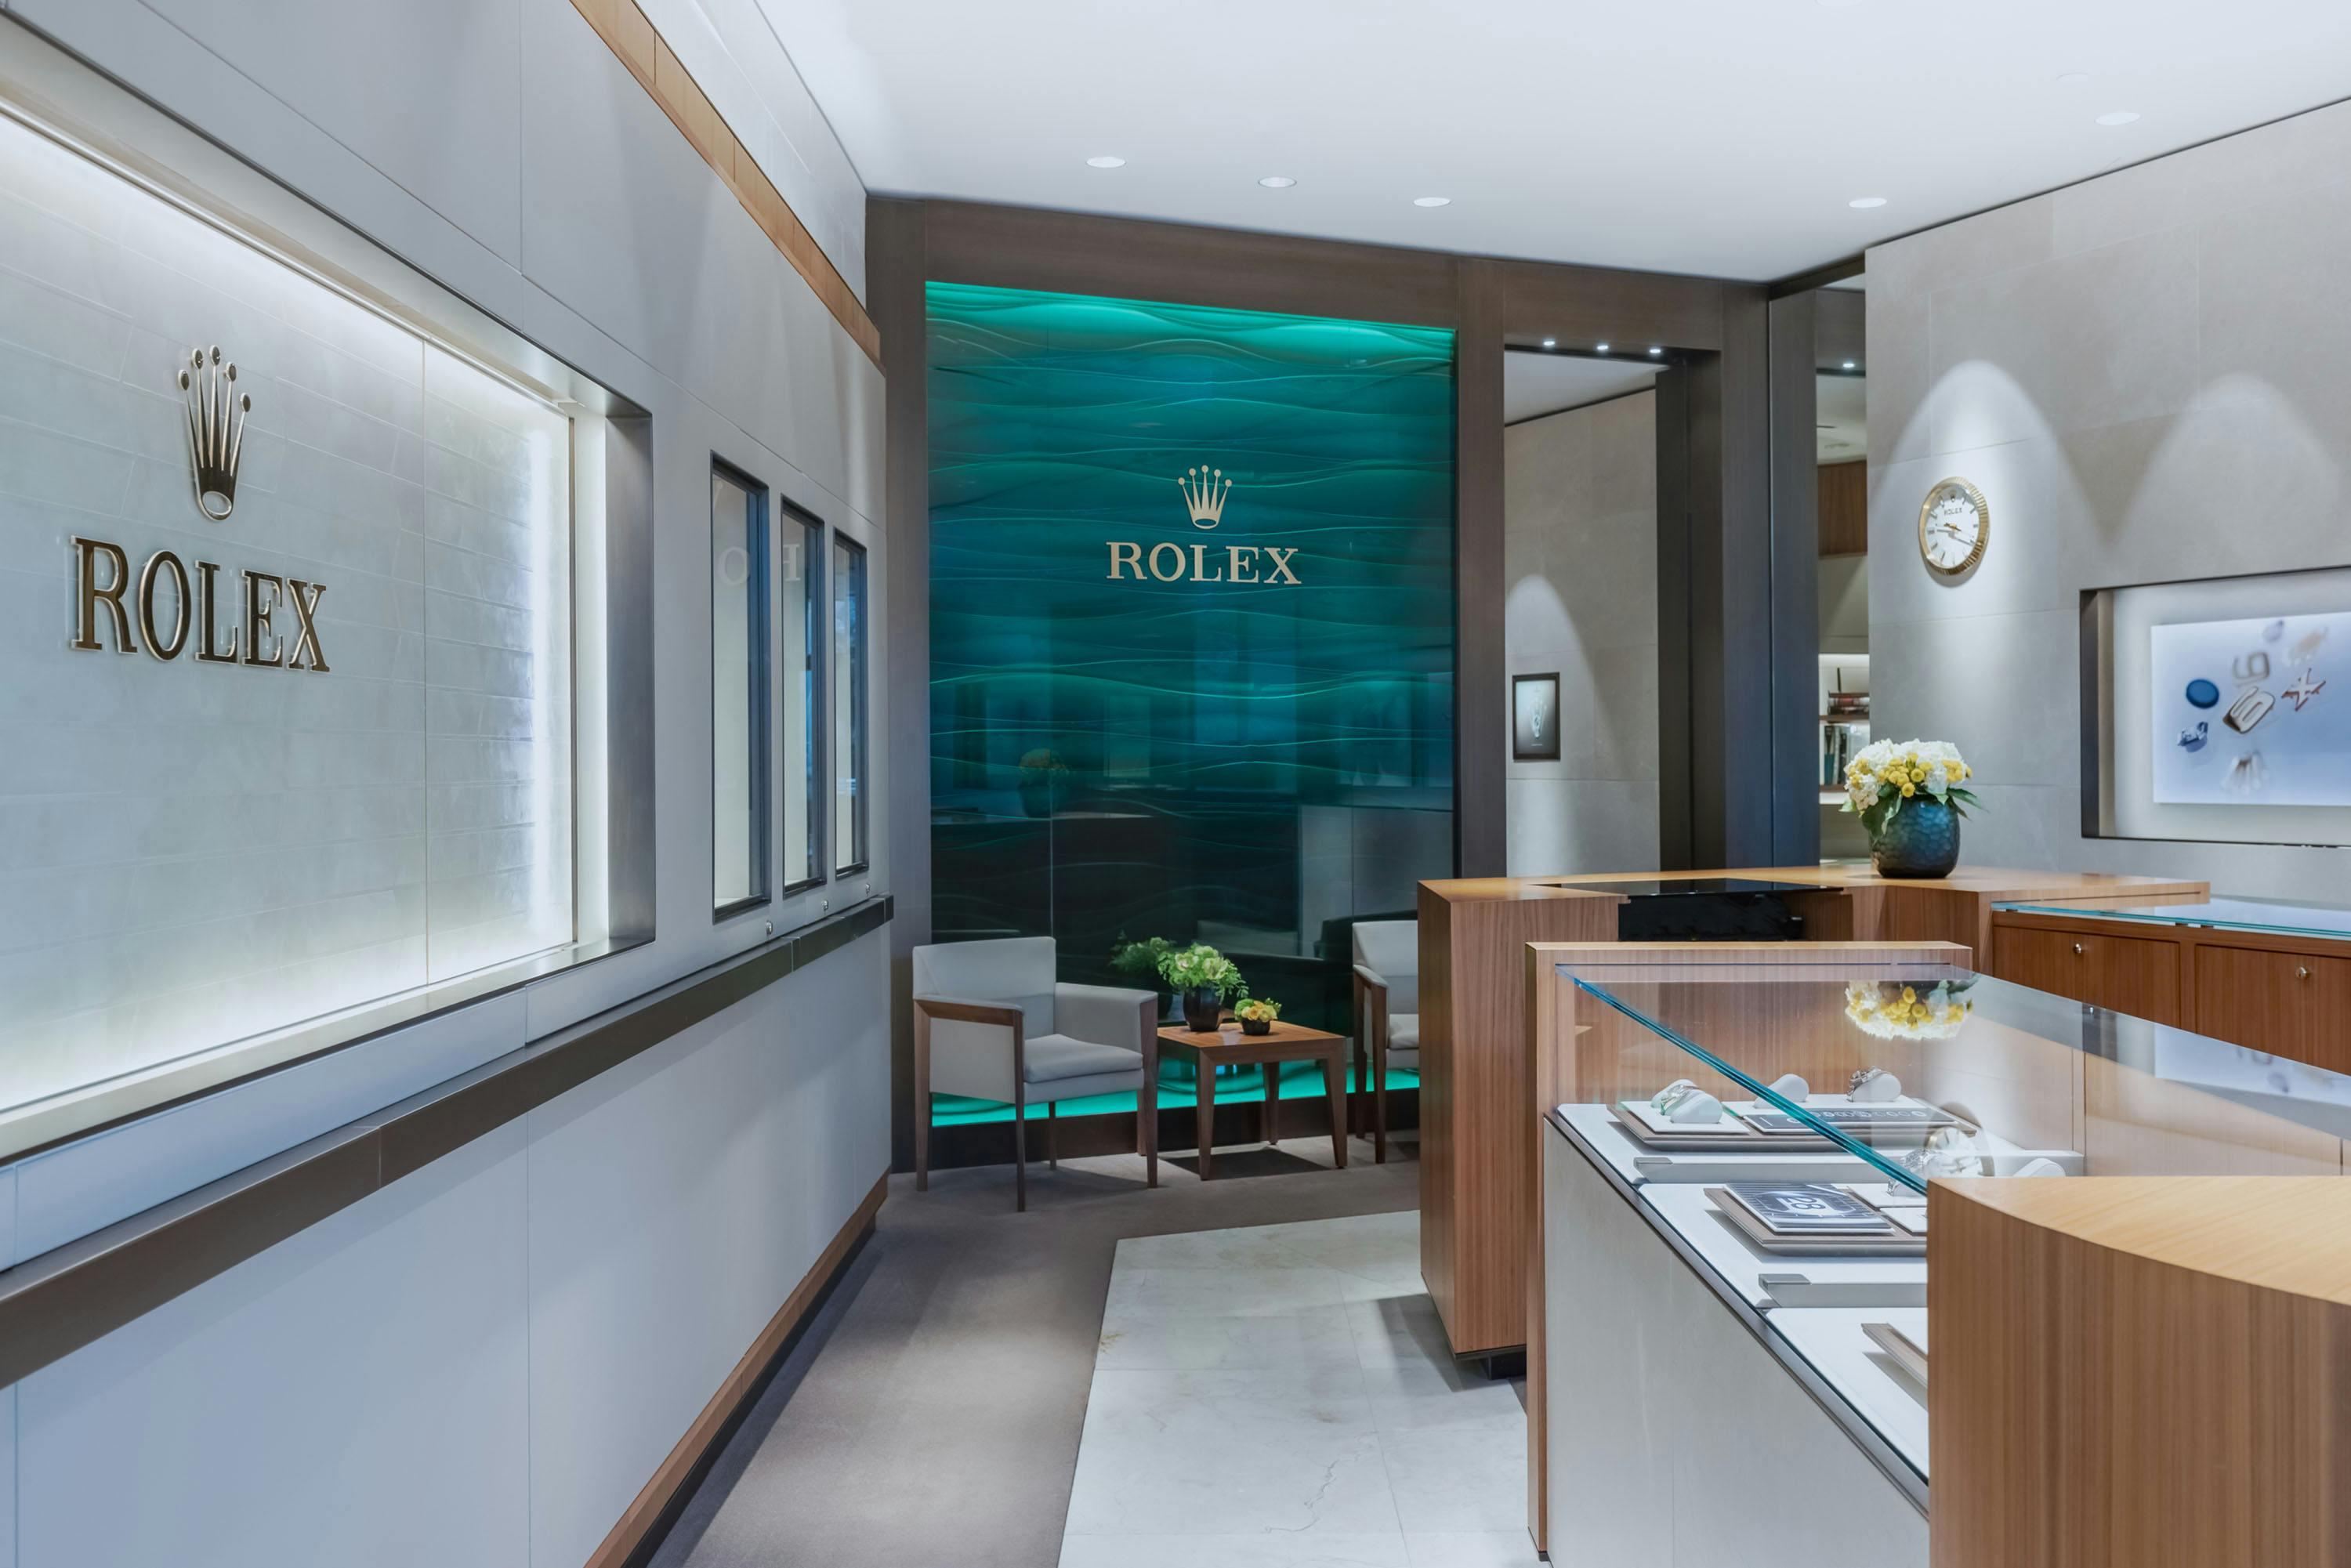 Interior of Rolex seating area at Shops at La Cantera location of Lee Michaels Fine Jewelry